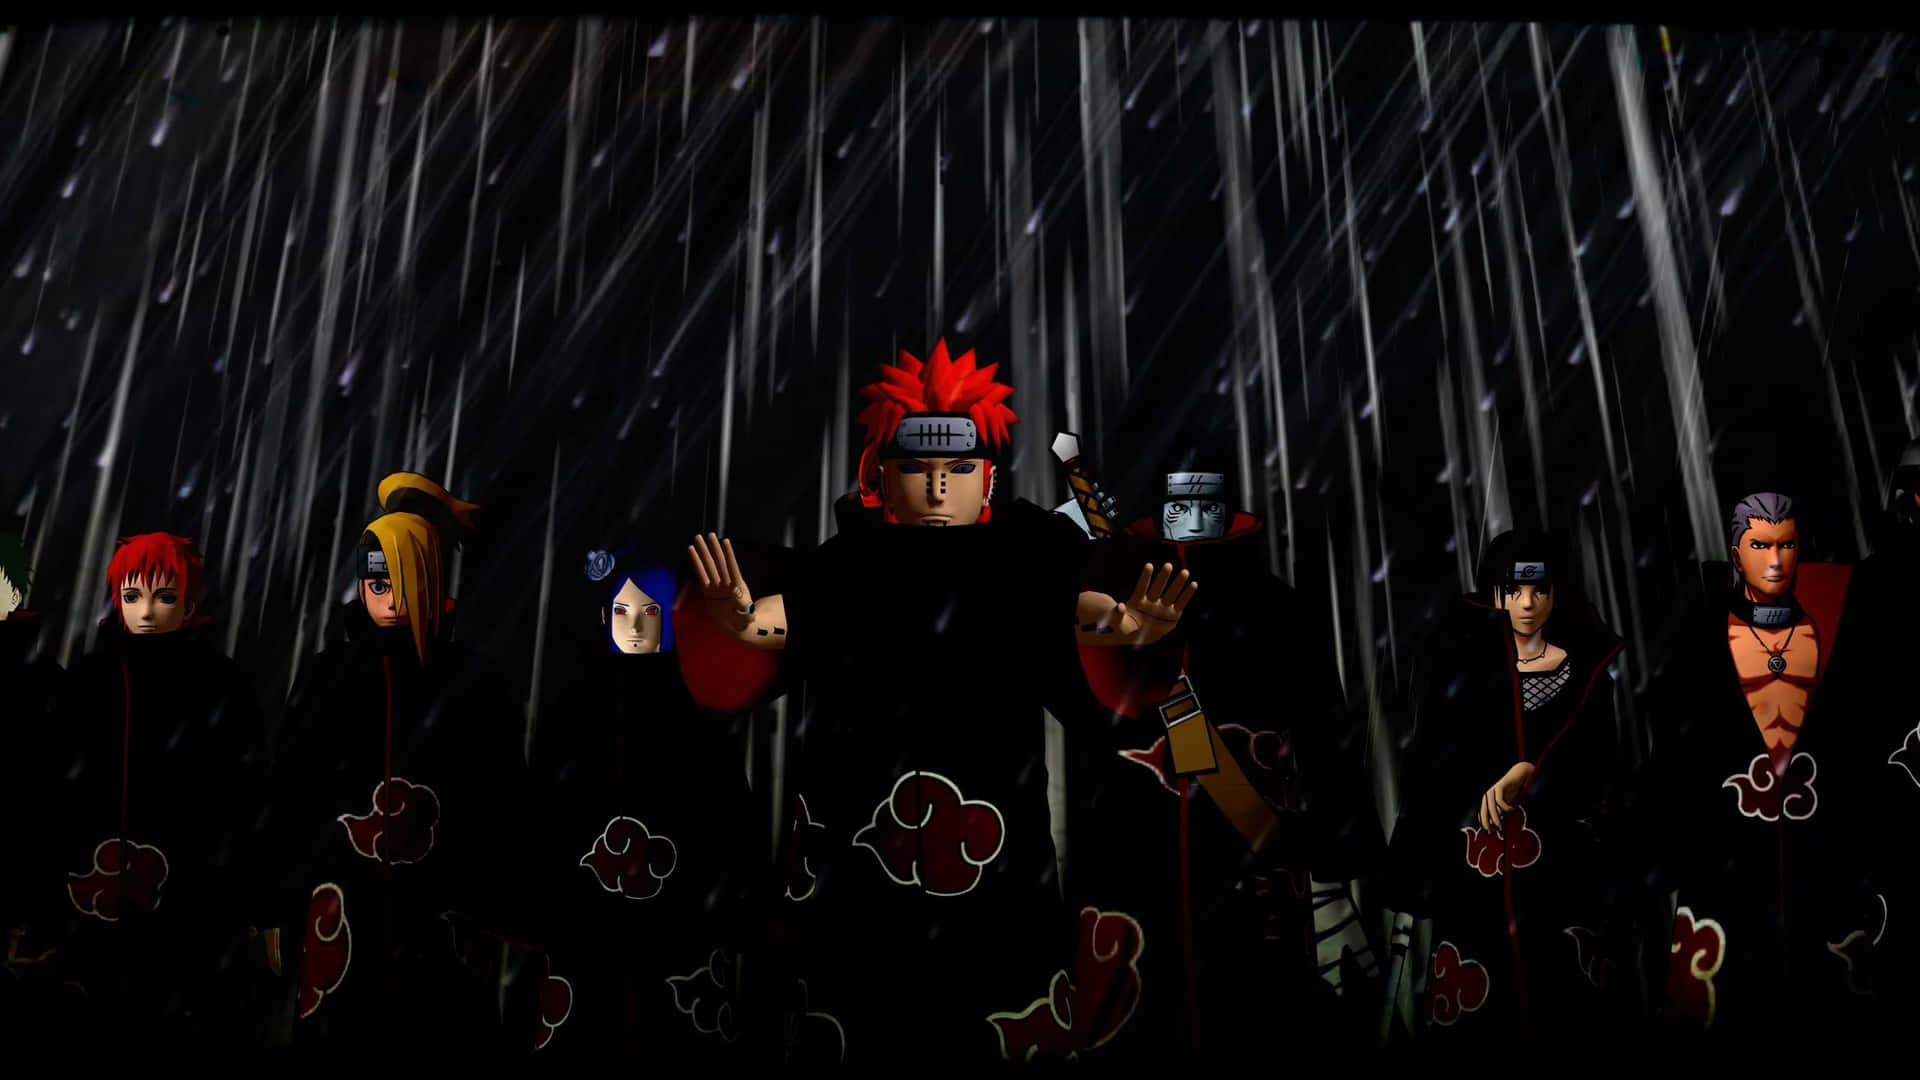 Join Akatsuki in Search for Power and Truth